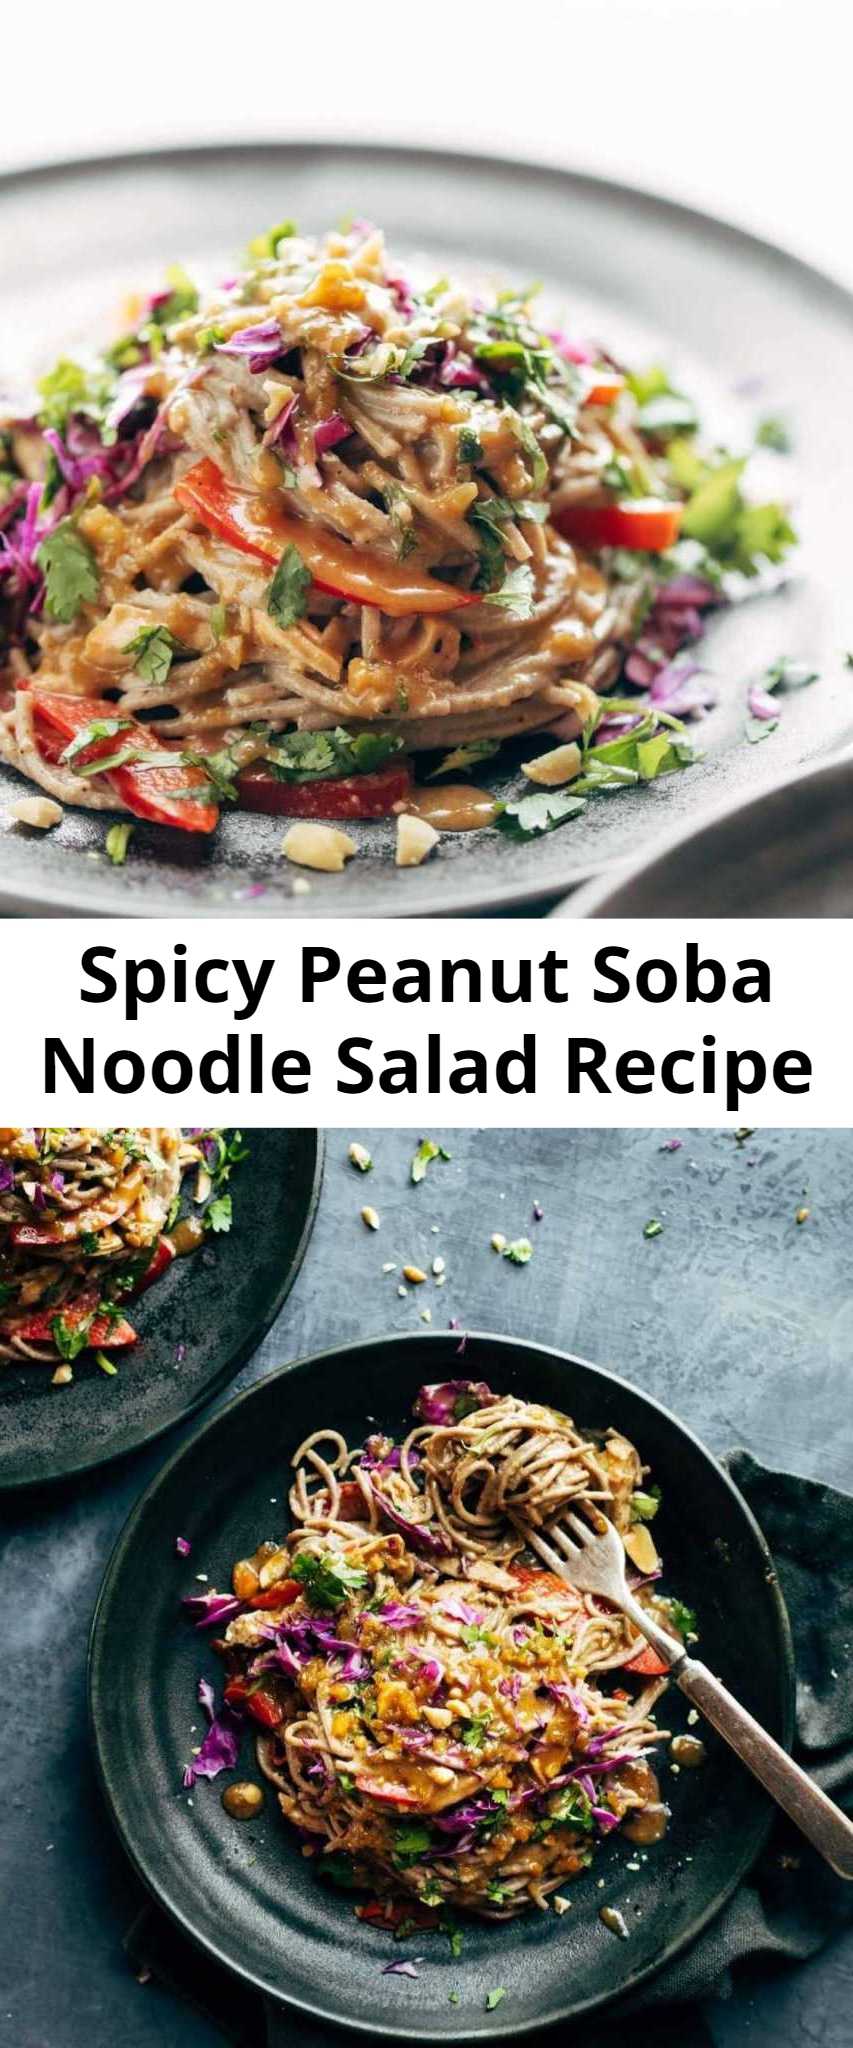 Spicy Peanut Soba Noodle Salad Recipe - Spicy Peanut Soba Noodle Salad featuring red peppers, cabbage, chicken, soba noodles, and a quick homemade spicy peanut sauce. Salads don’t get much yummier than this.